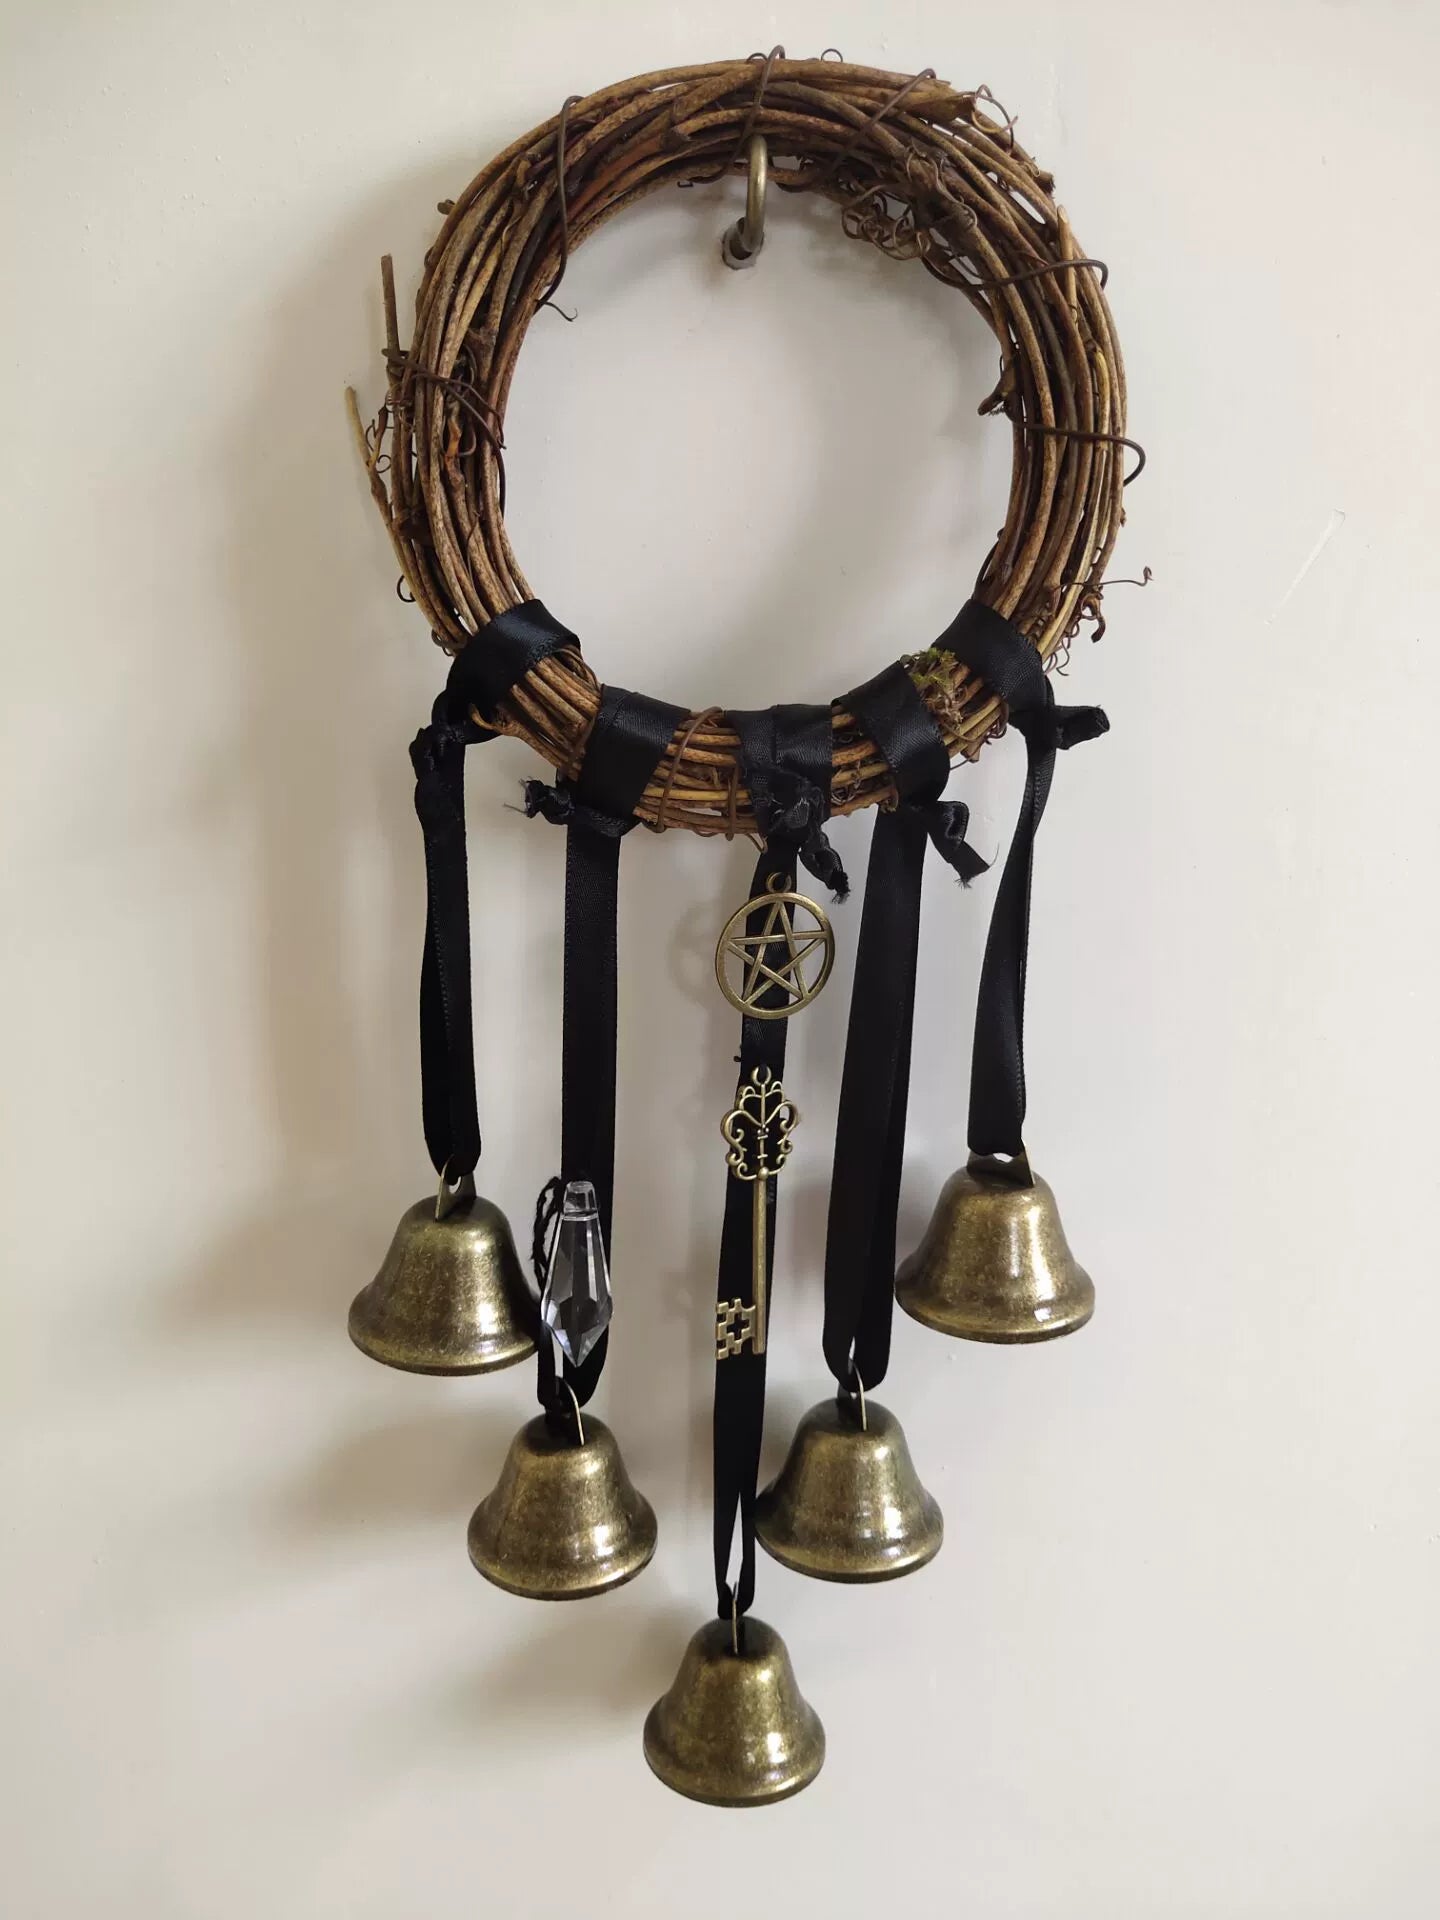 Witchy Door Bell Chimes,Vine Ring Wind Chimes - The Witchy Gypsy